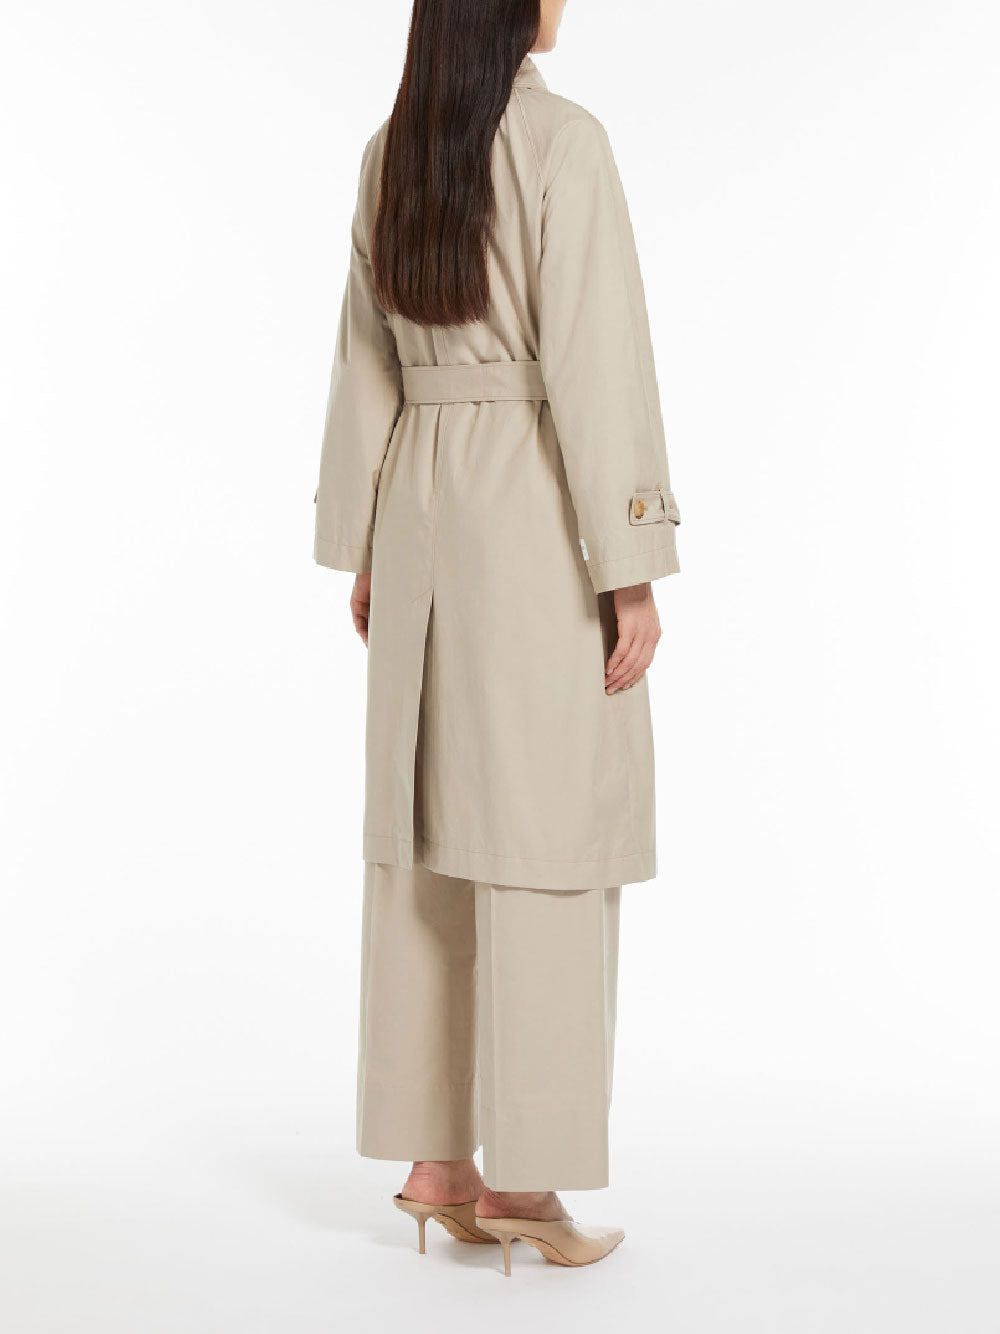 Ftrench trench coat